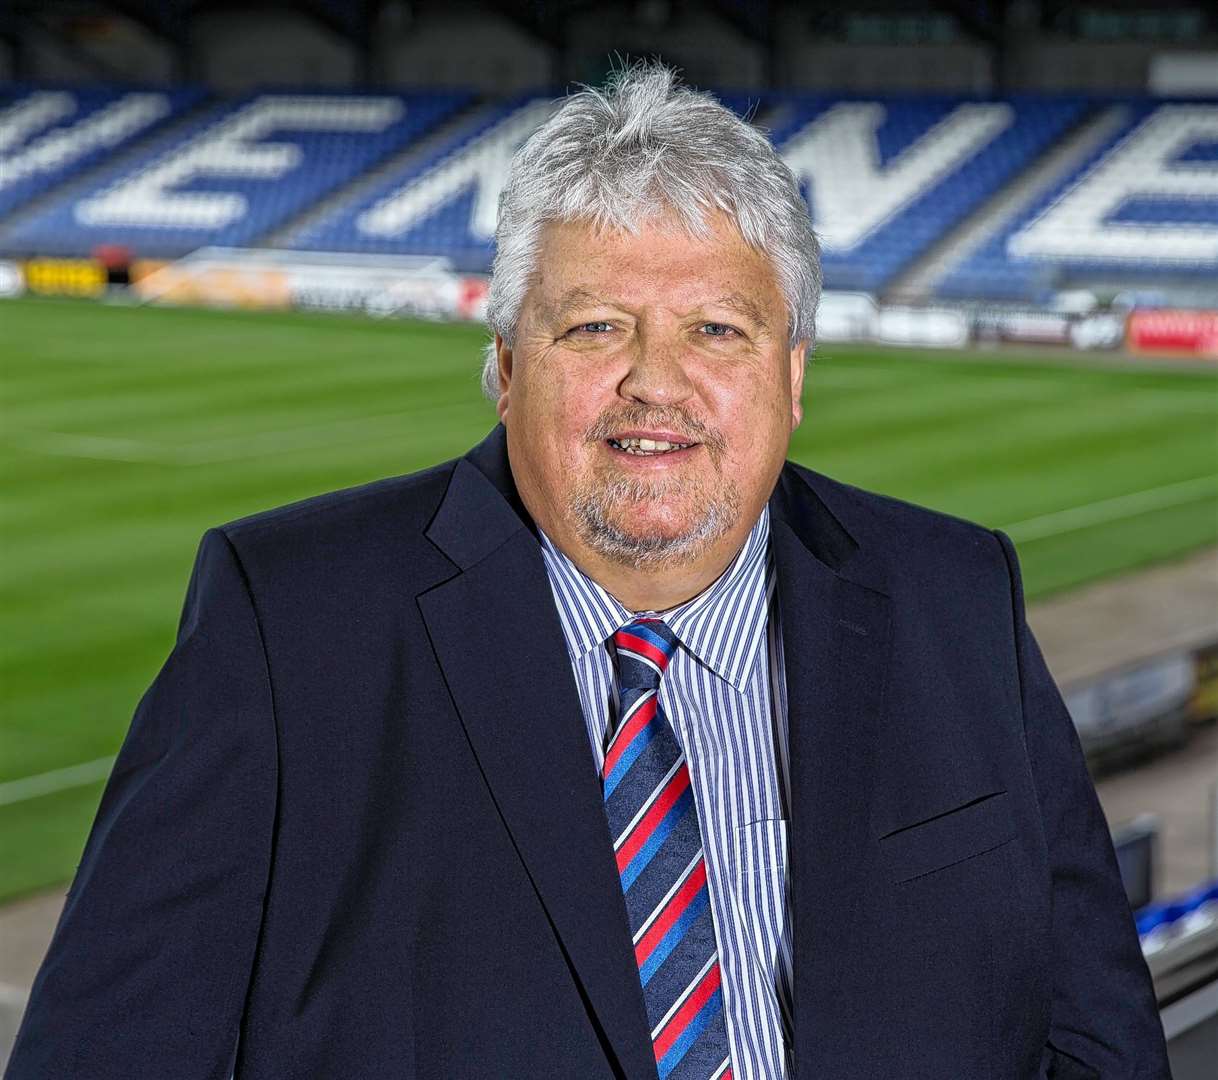 Graham Rae has stood down as chairman of Inverness Caledonian Thistle.